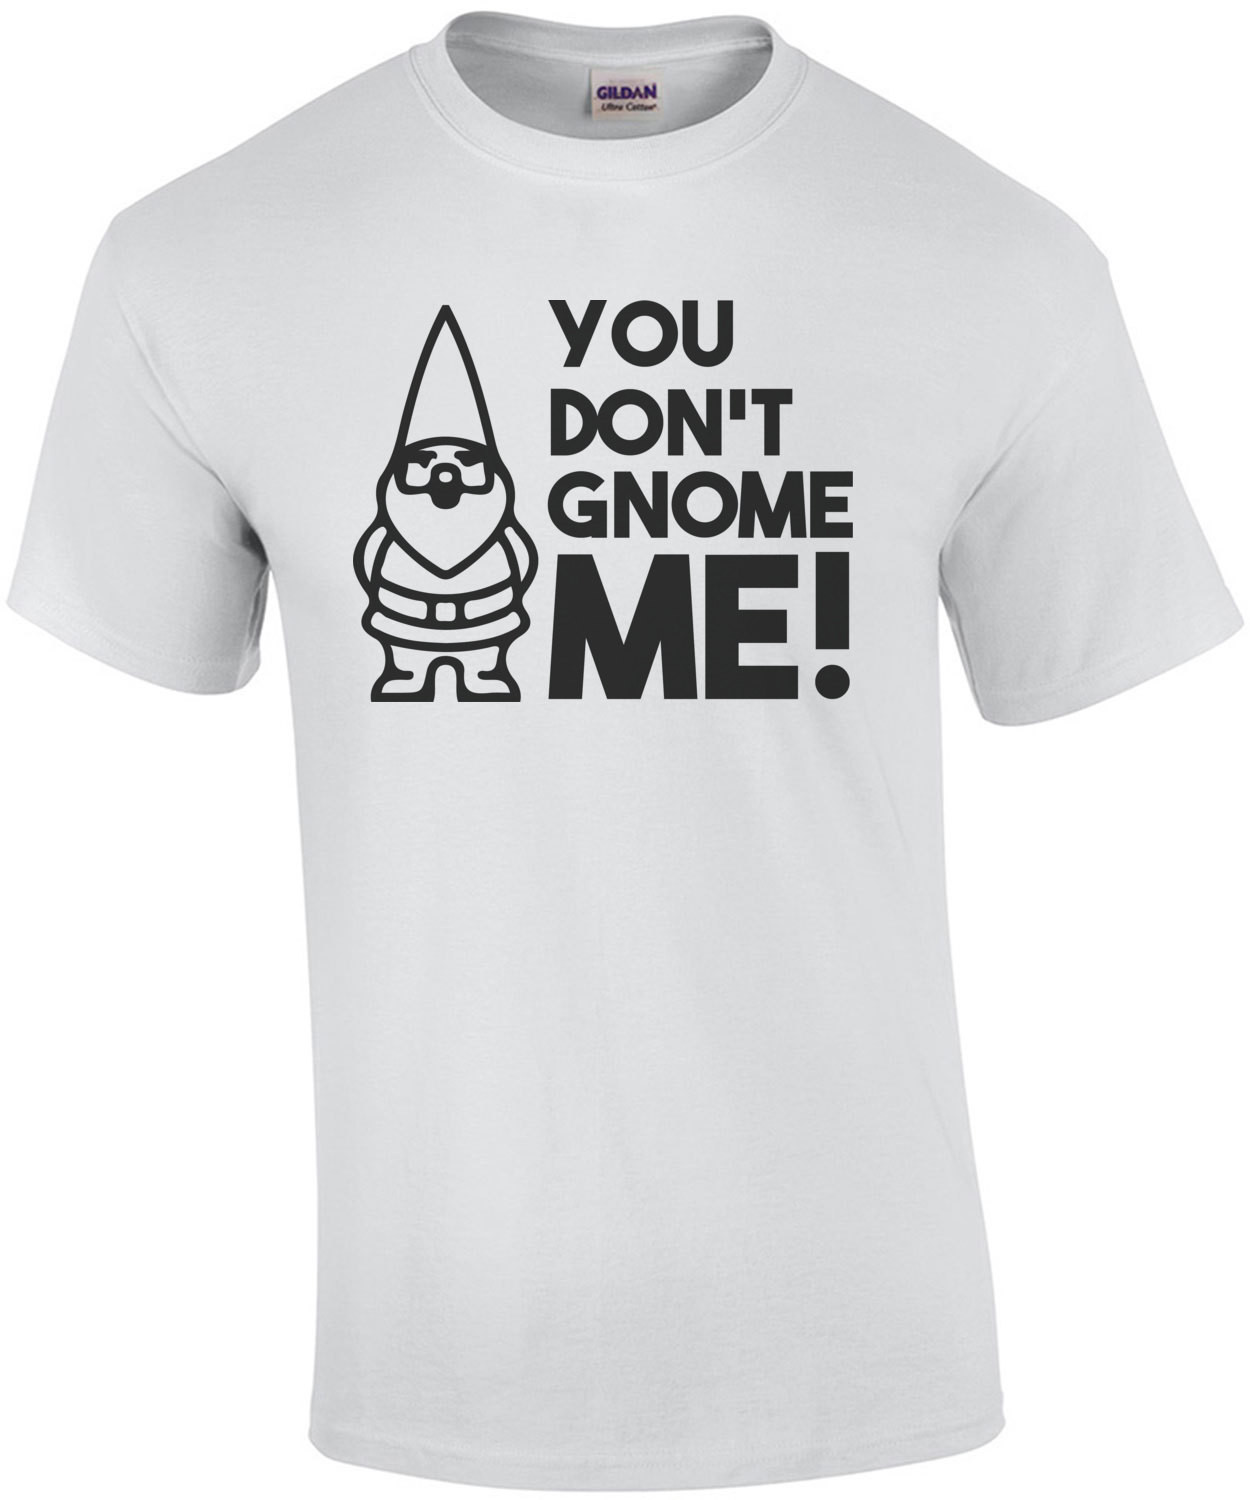 You don't gnome me!